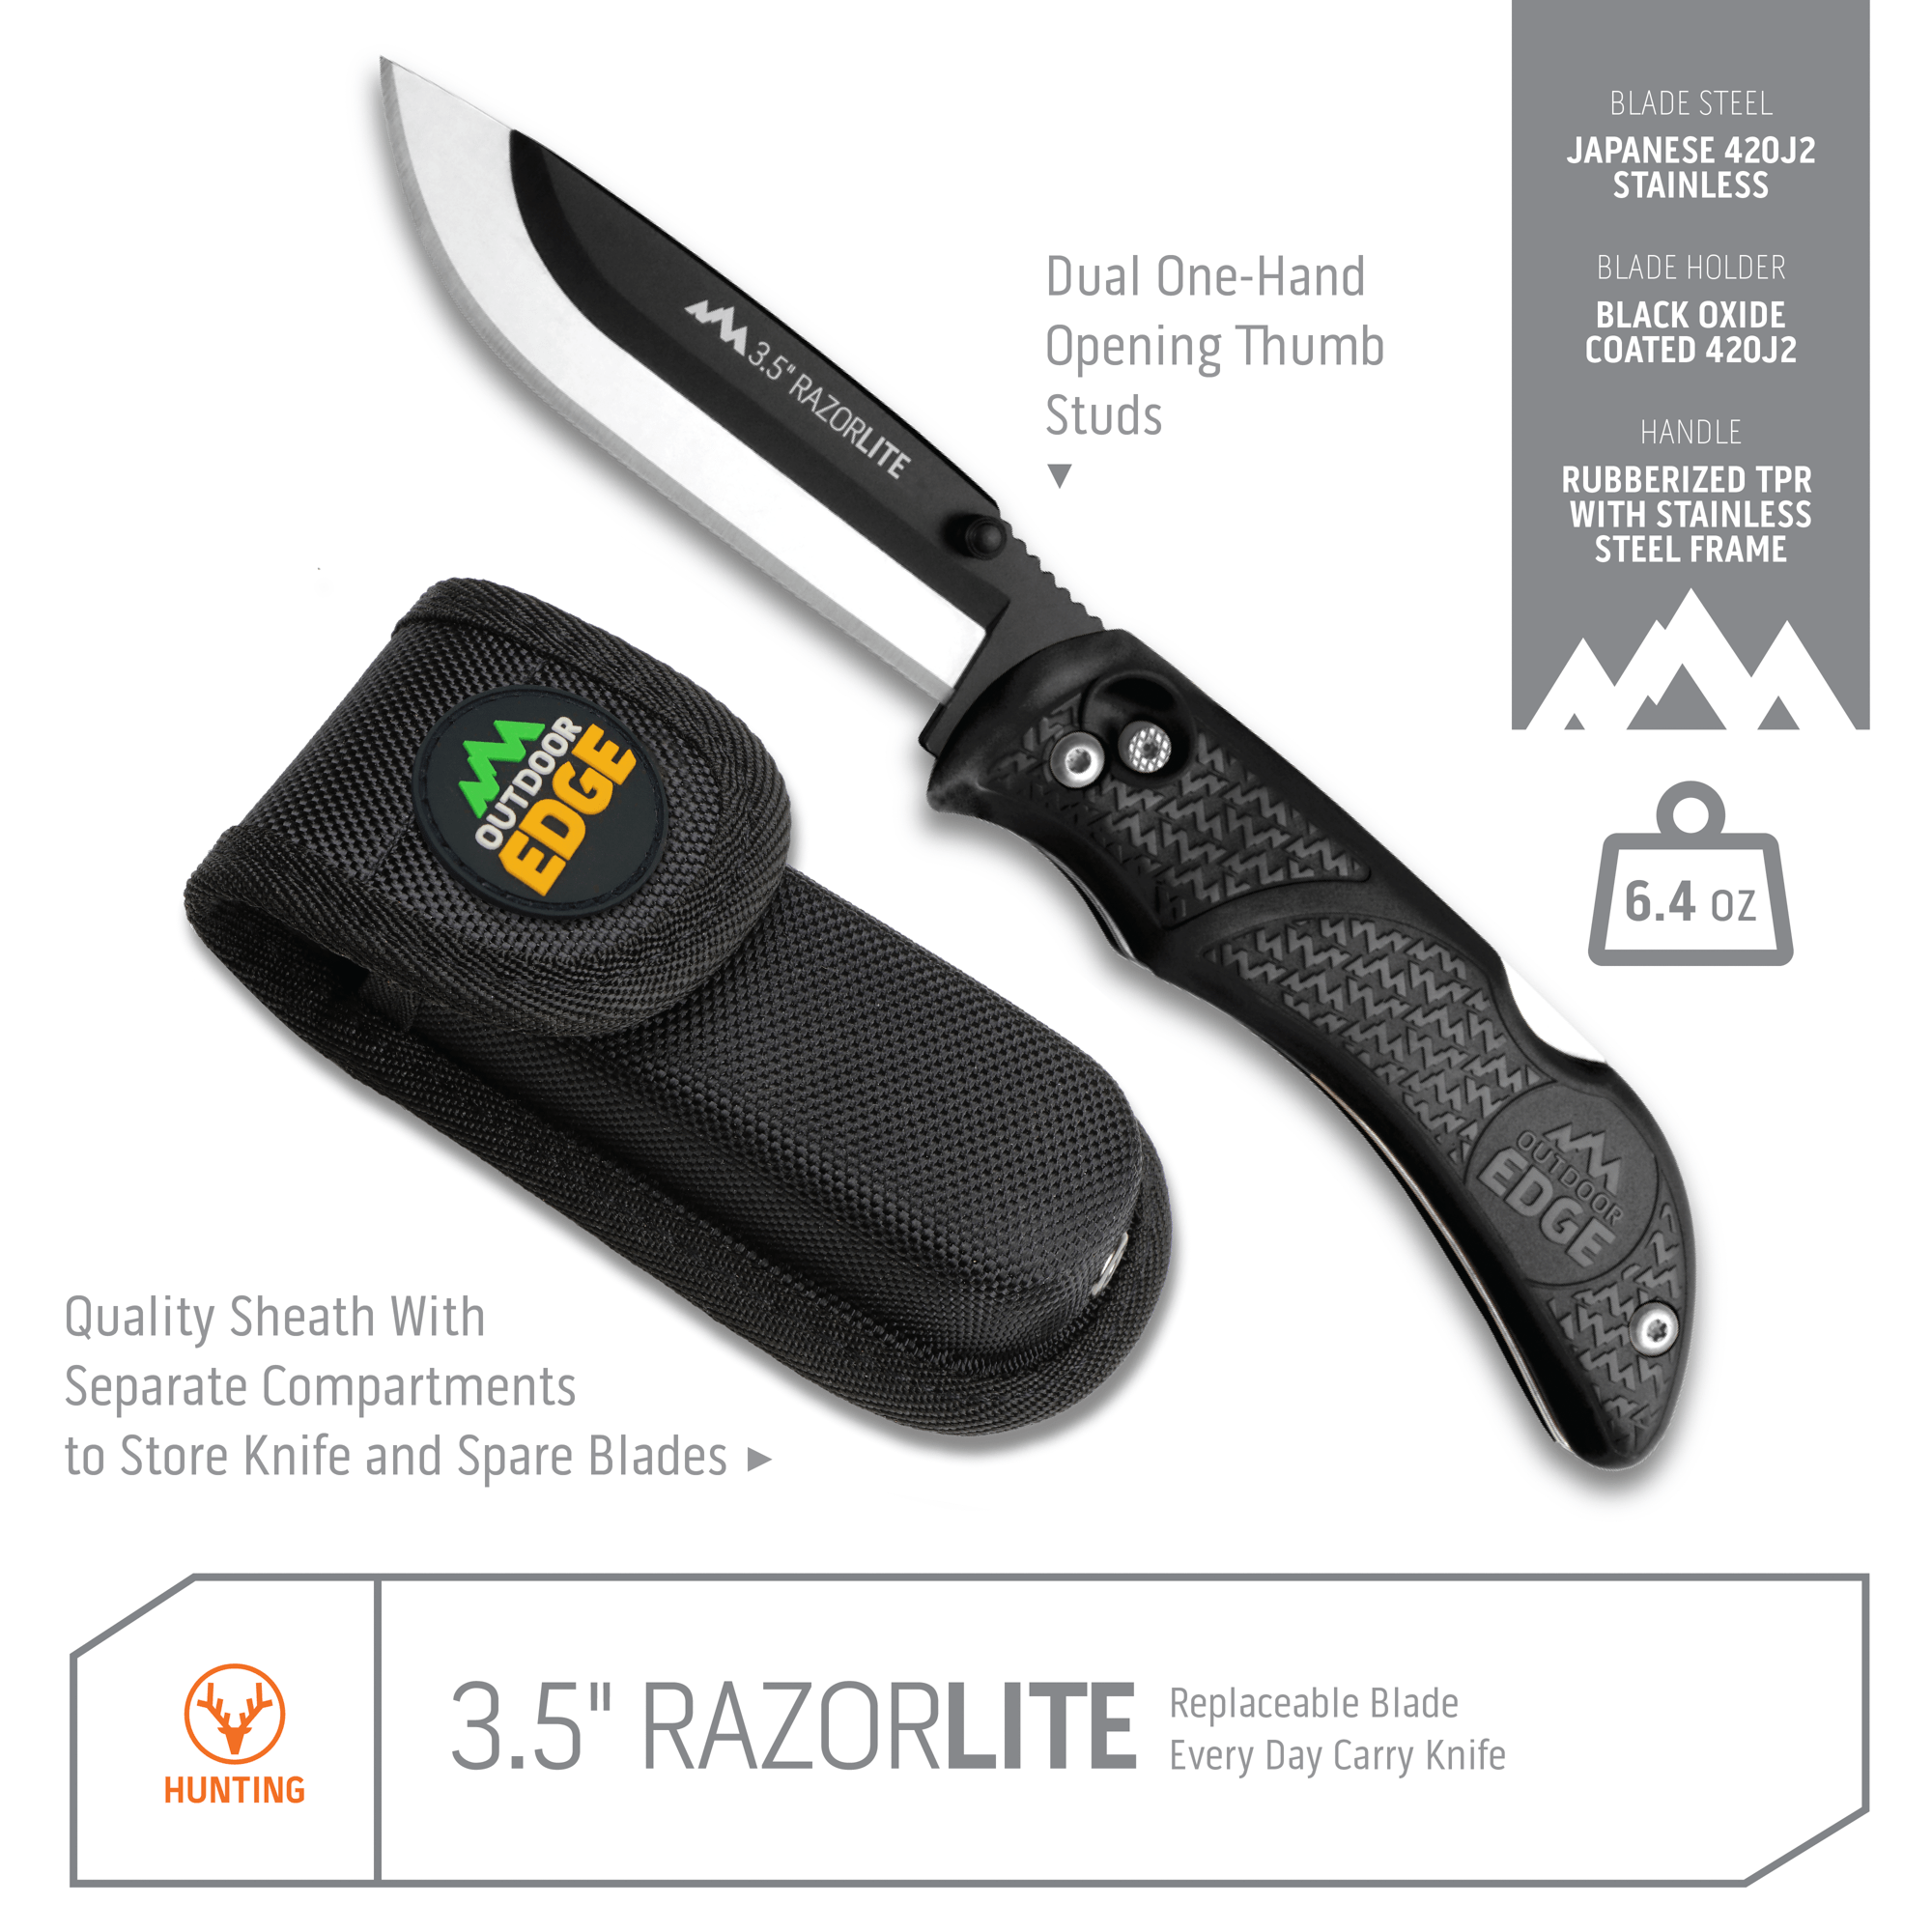 Outdoor Edge Black RazorLite Razor Blade Knife Product Photo showing knife and case with callouts